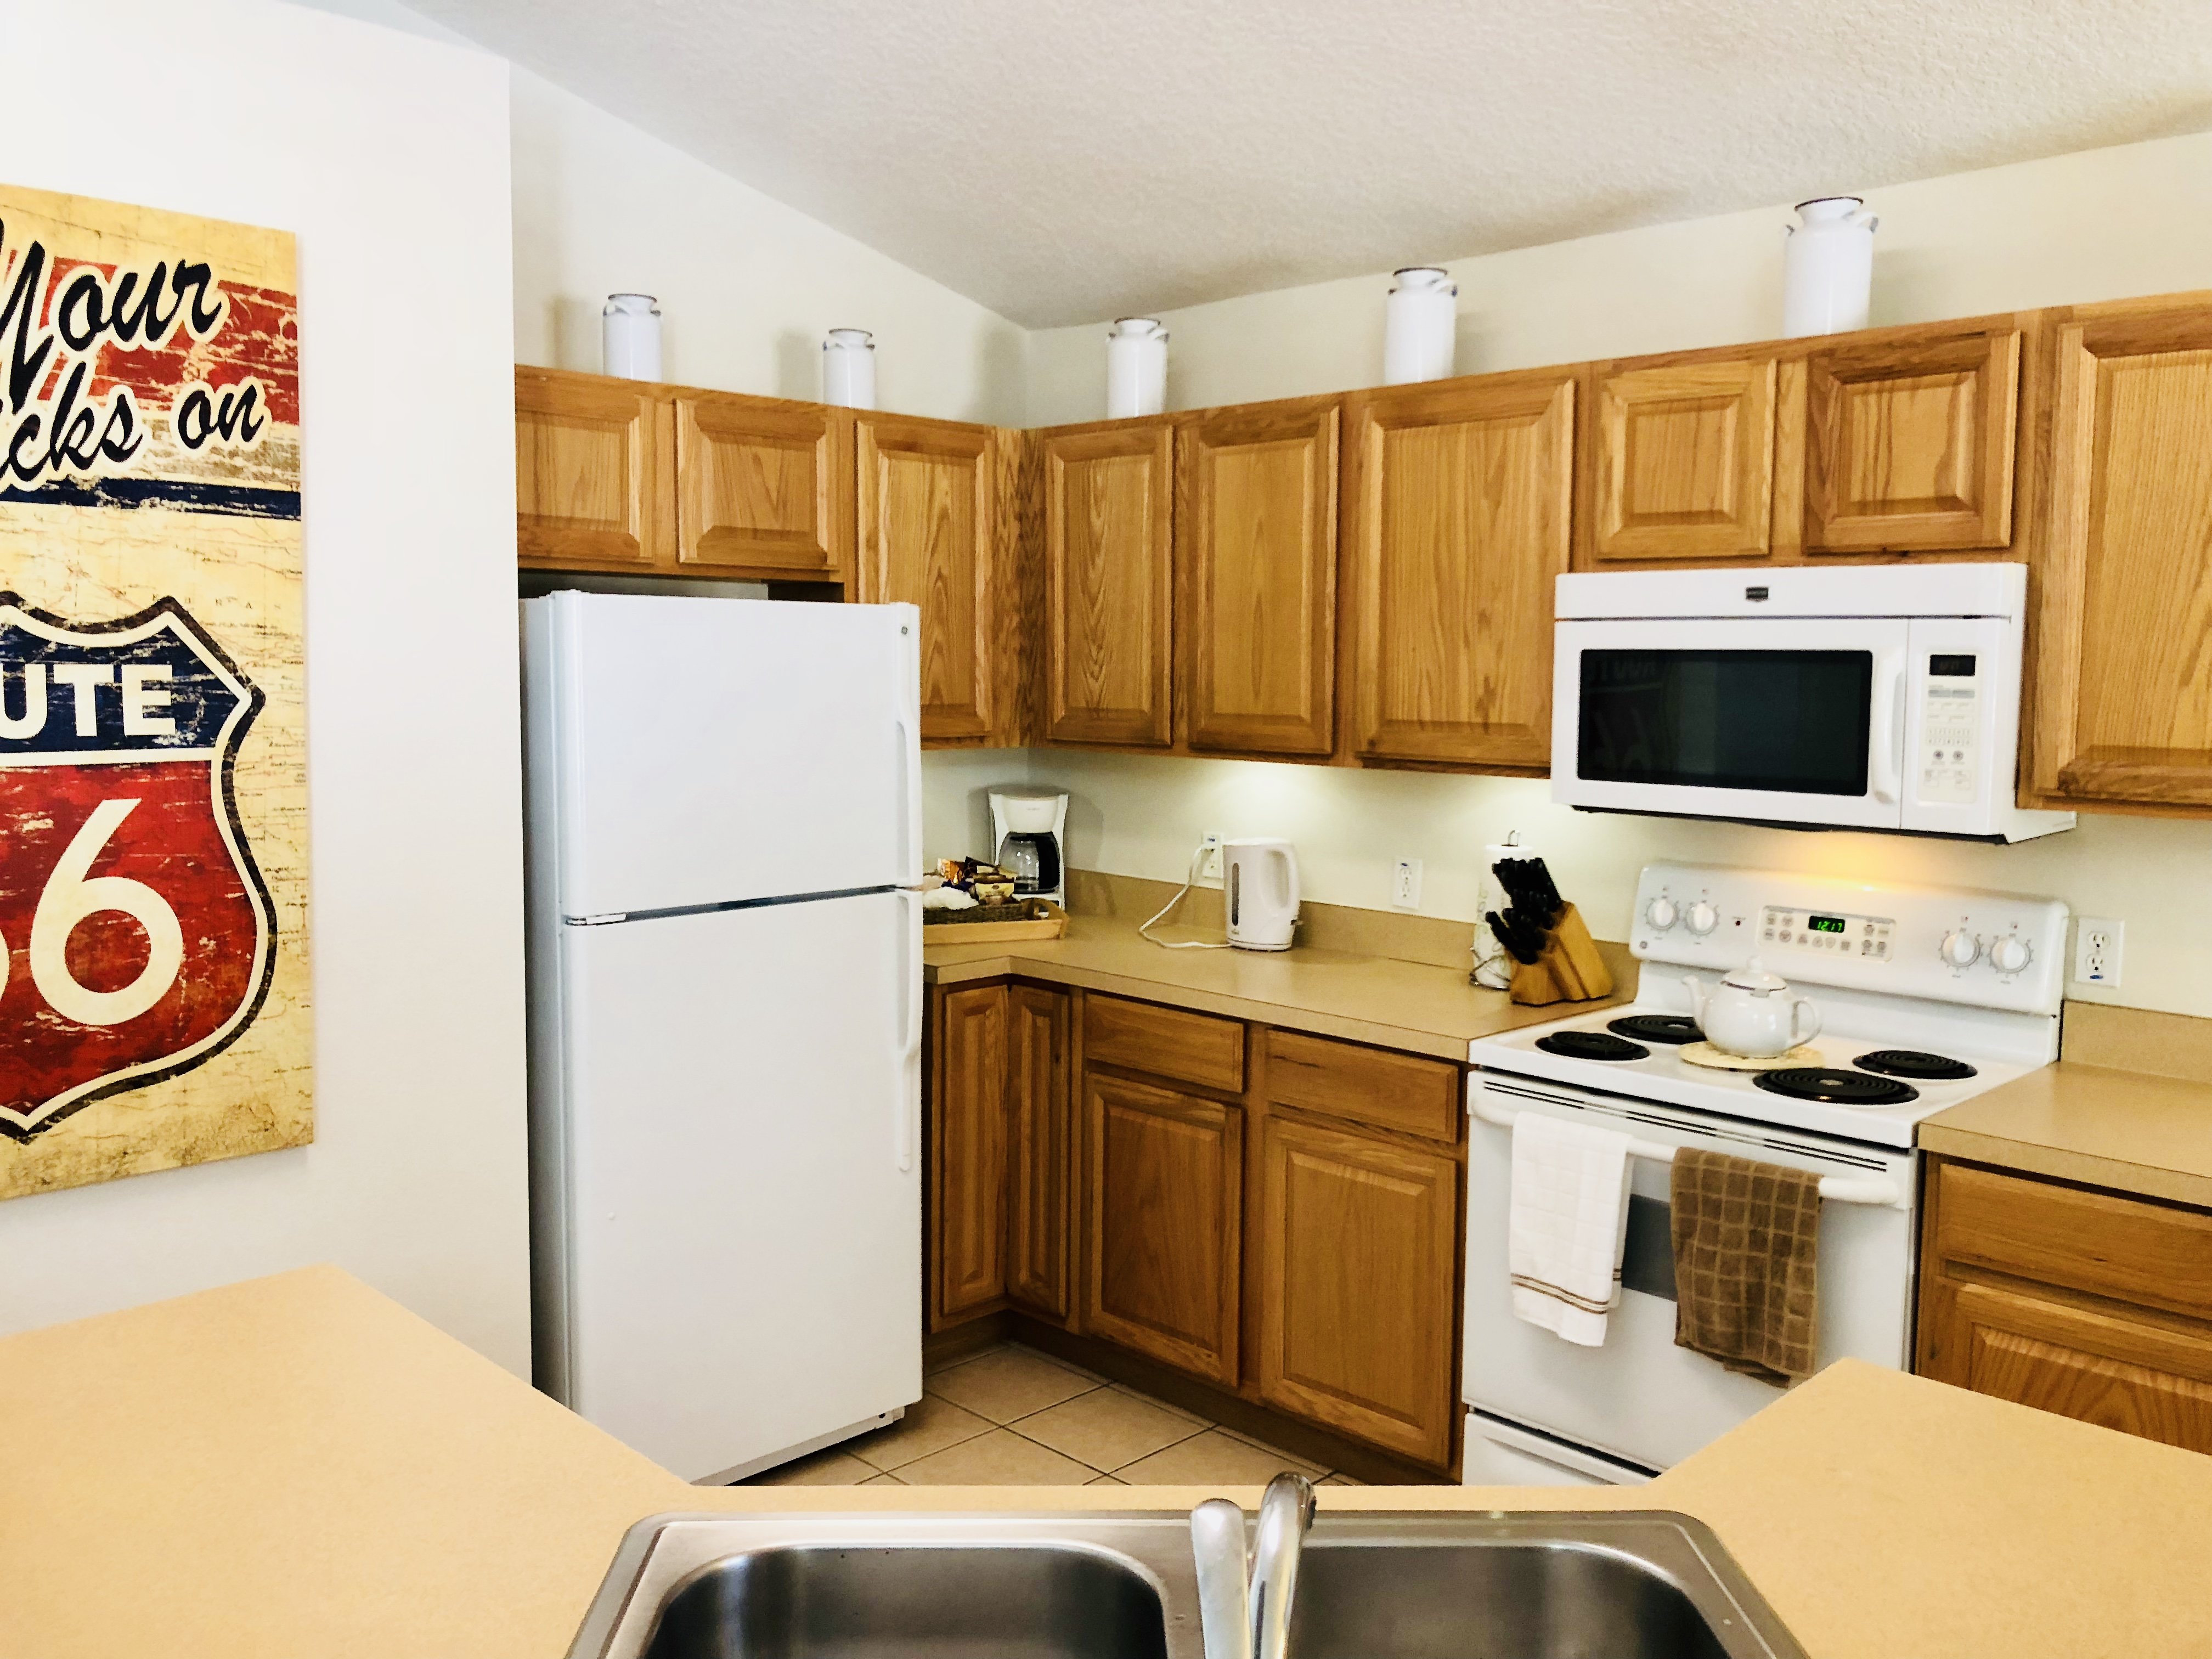 Guest Reviews. Well equipped kitchen